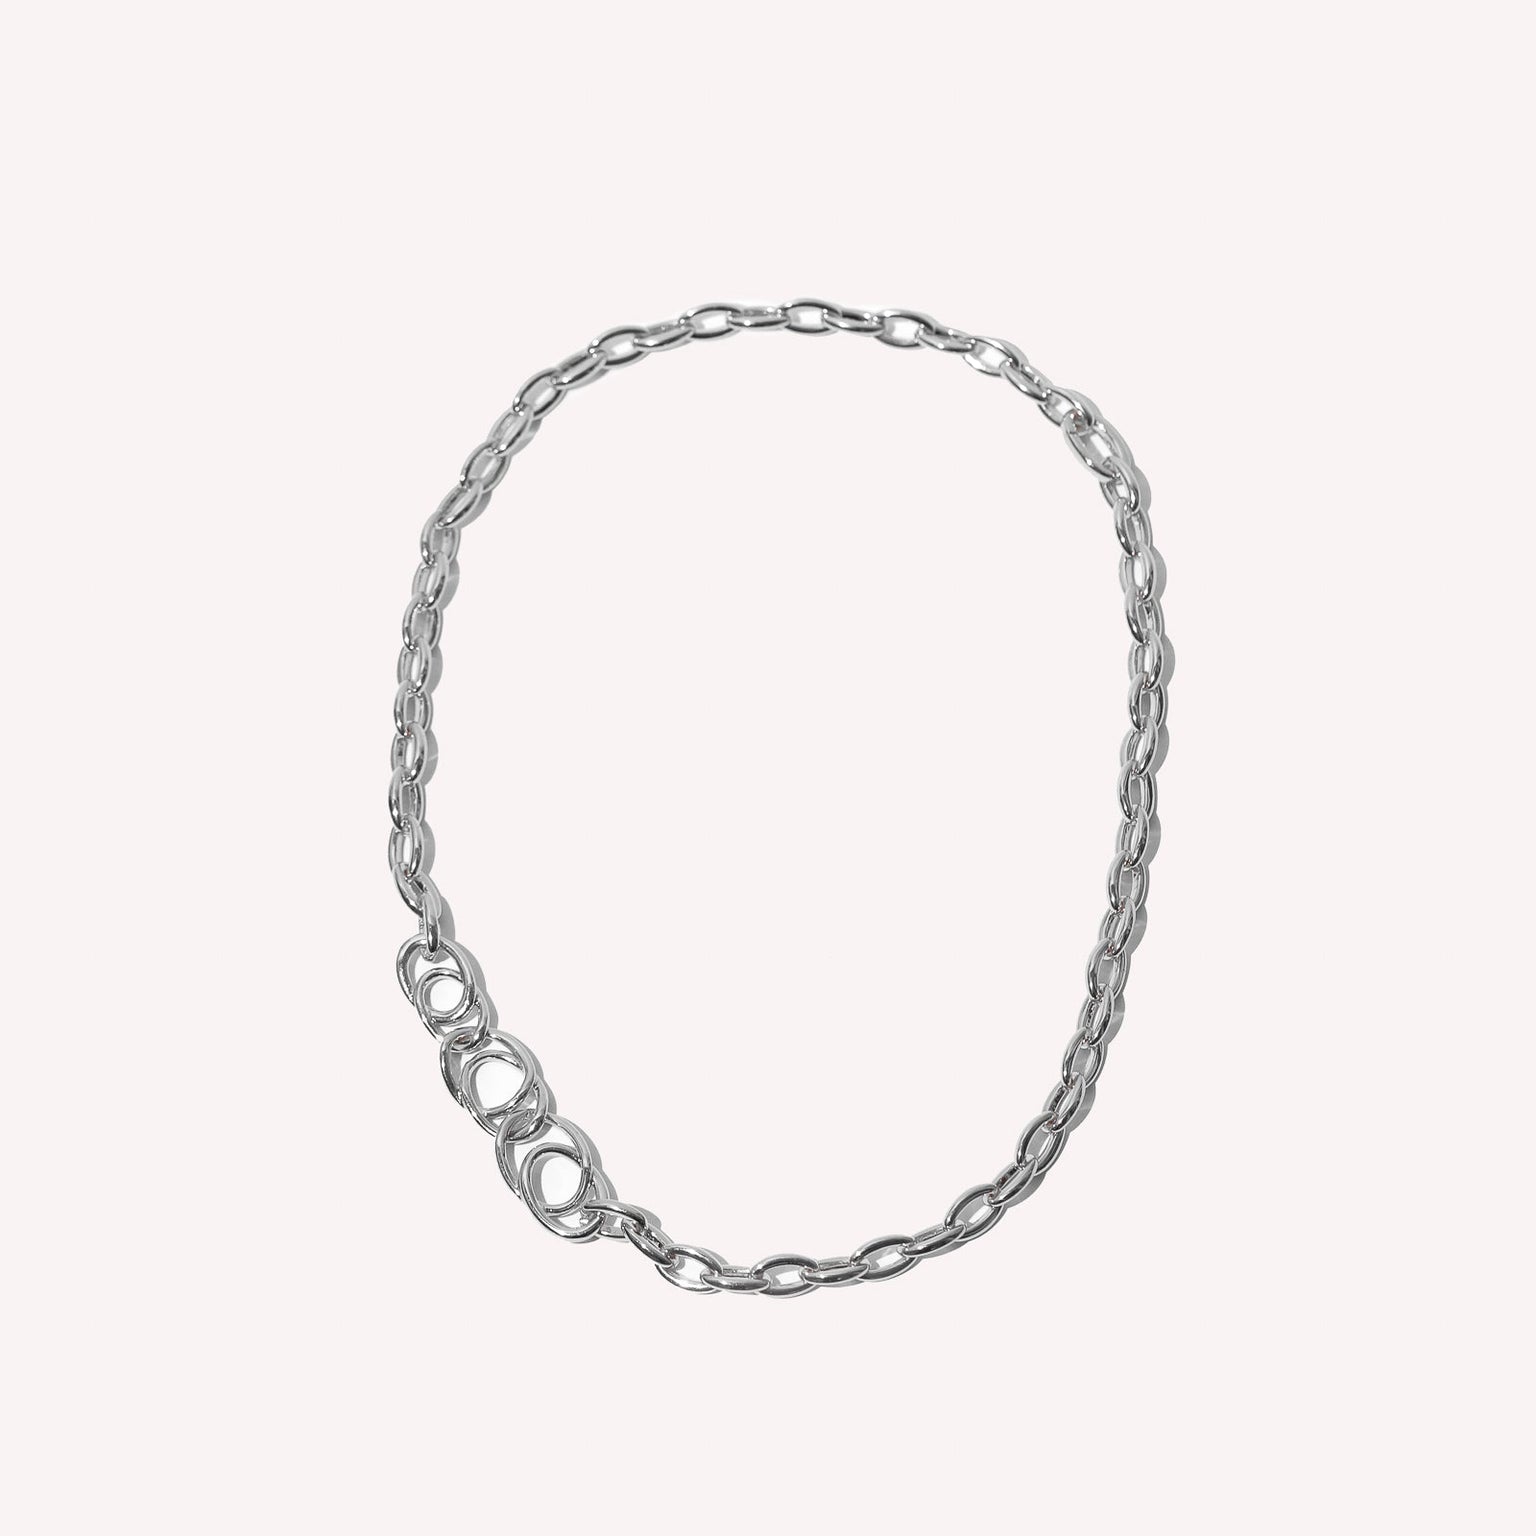 Orbit Chain Necklace in Silver flat lay